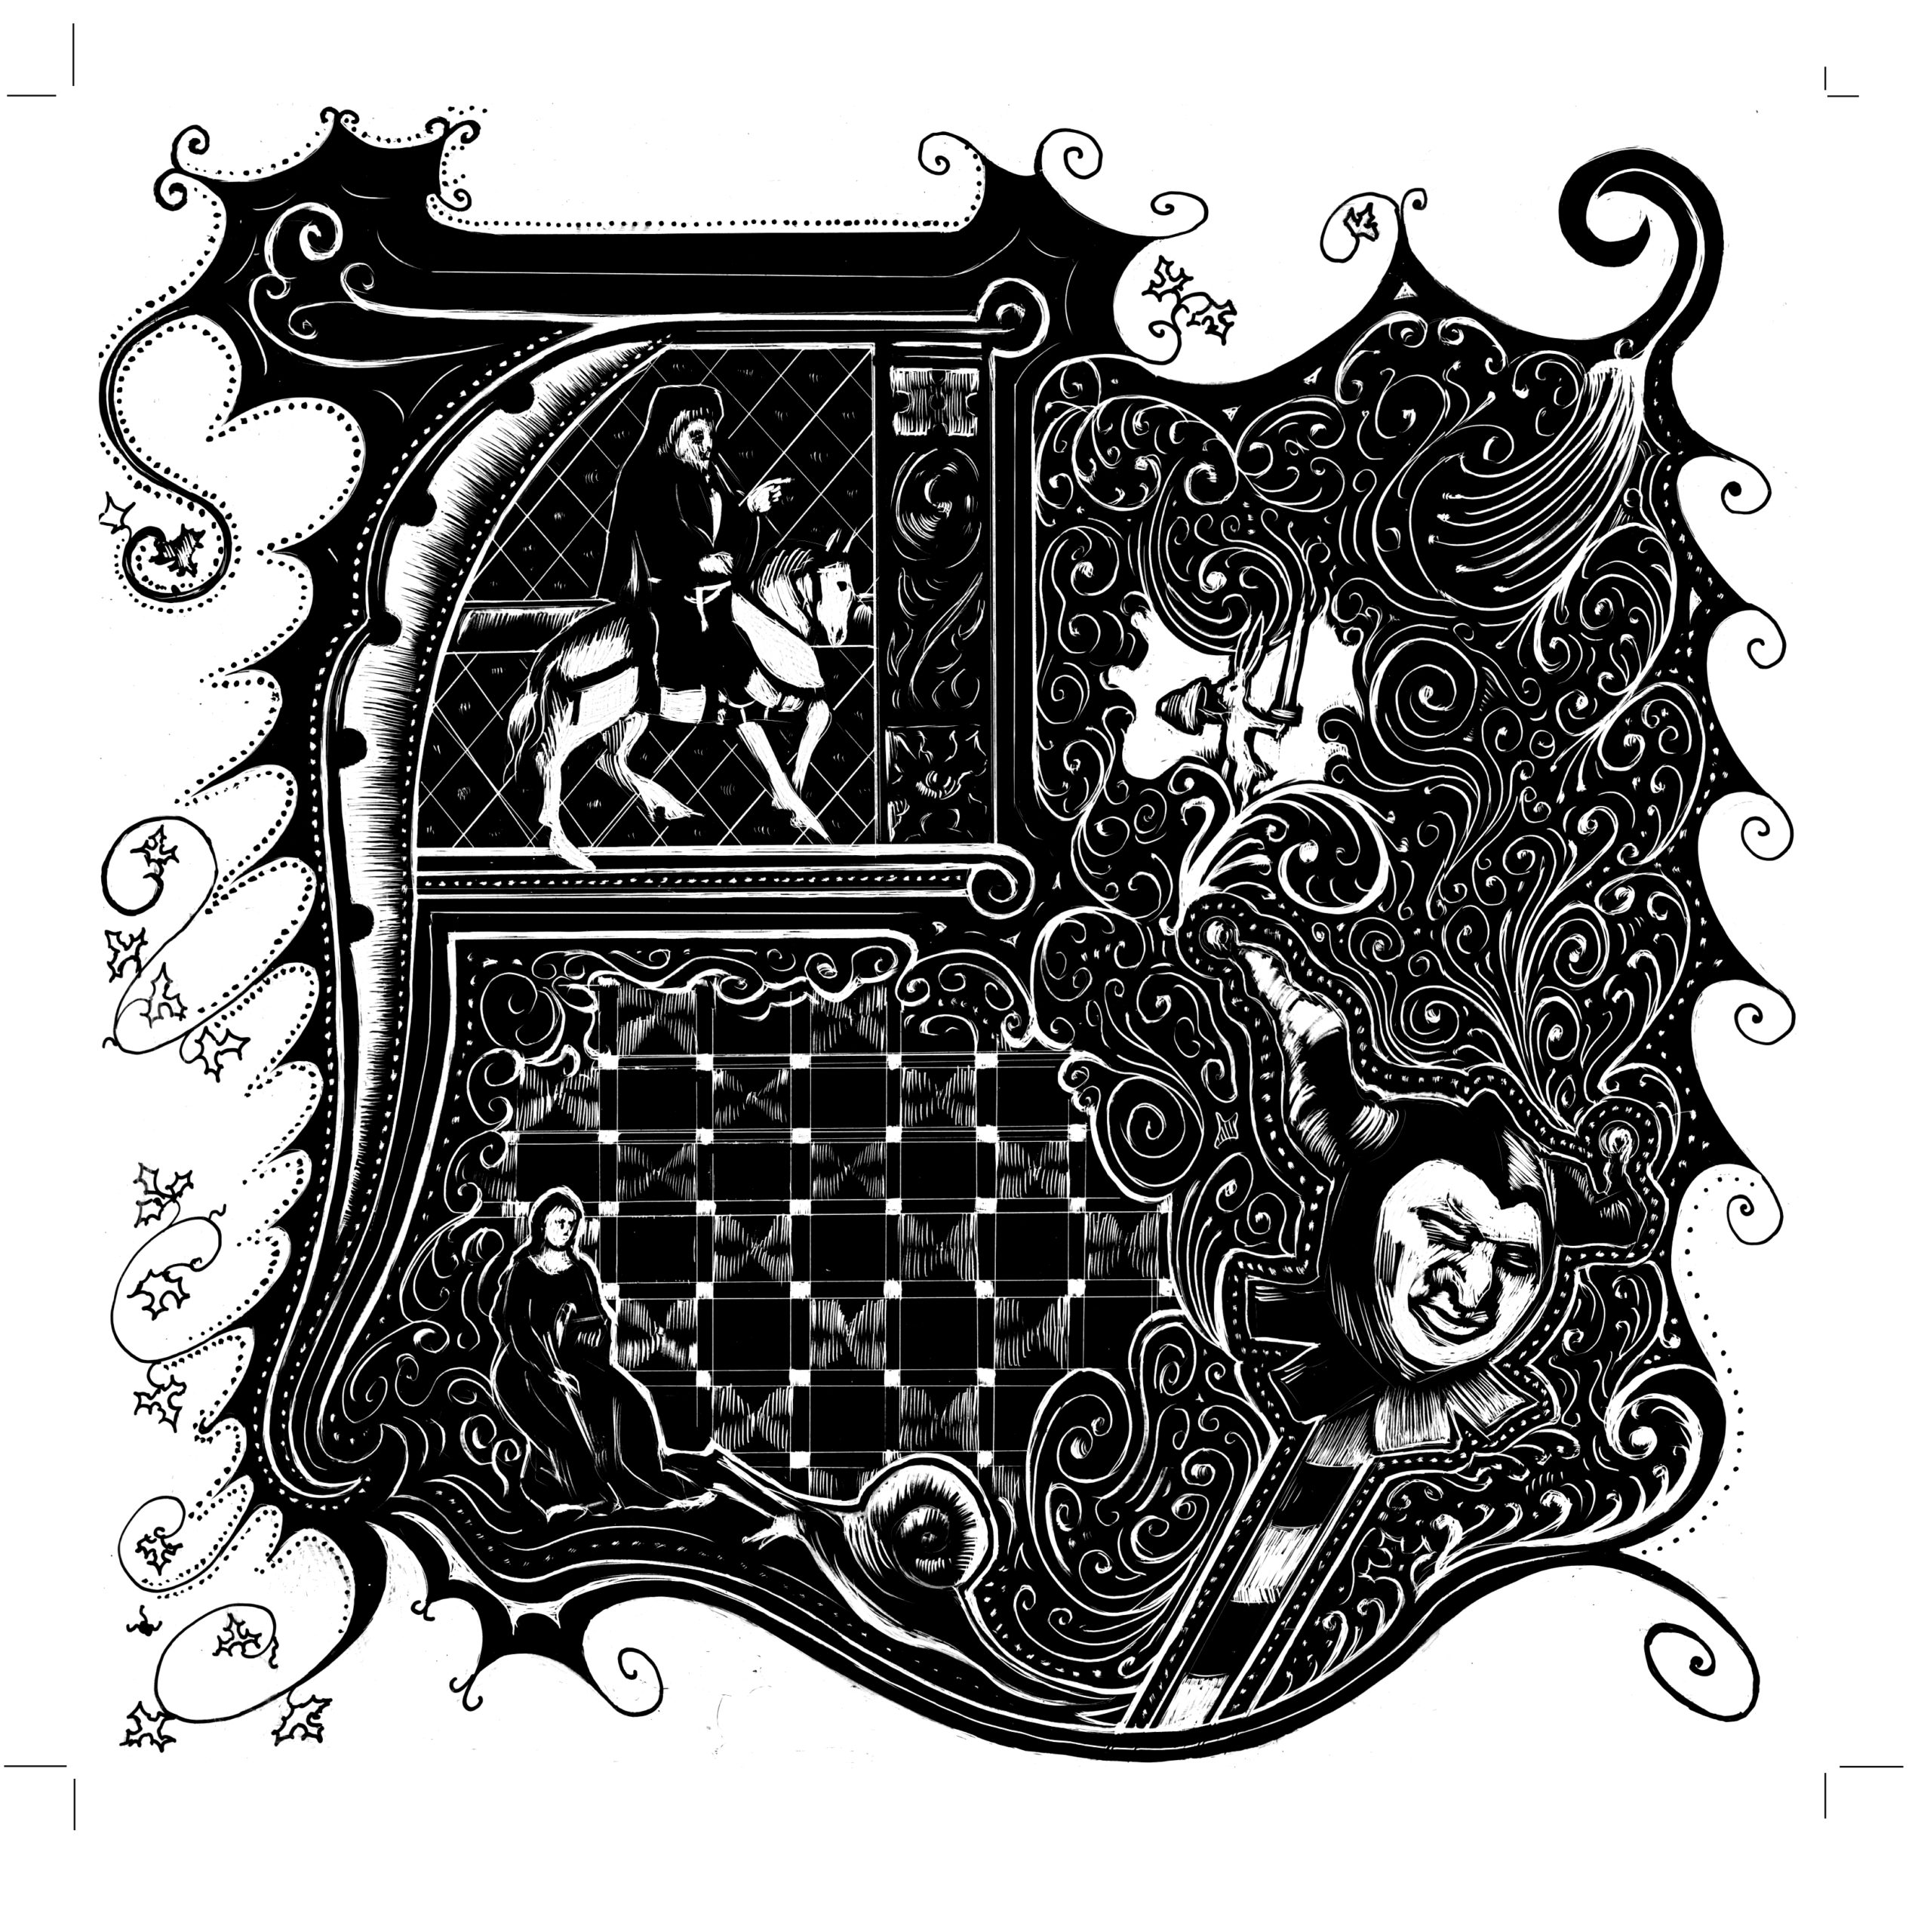 Aprill Chaucerian-inspired black and white image of medieval figures in a decorative scroll edge.